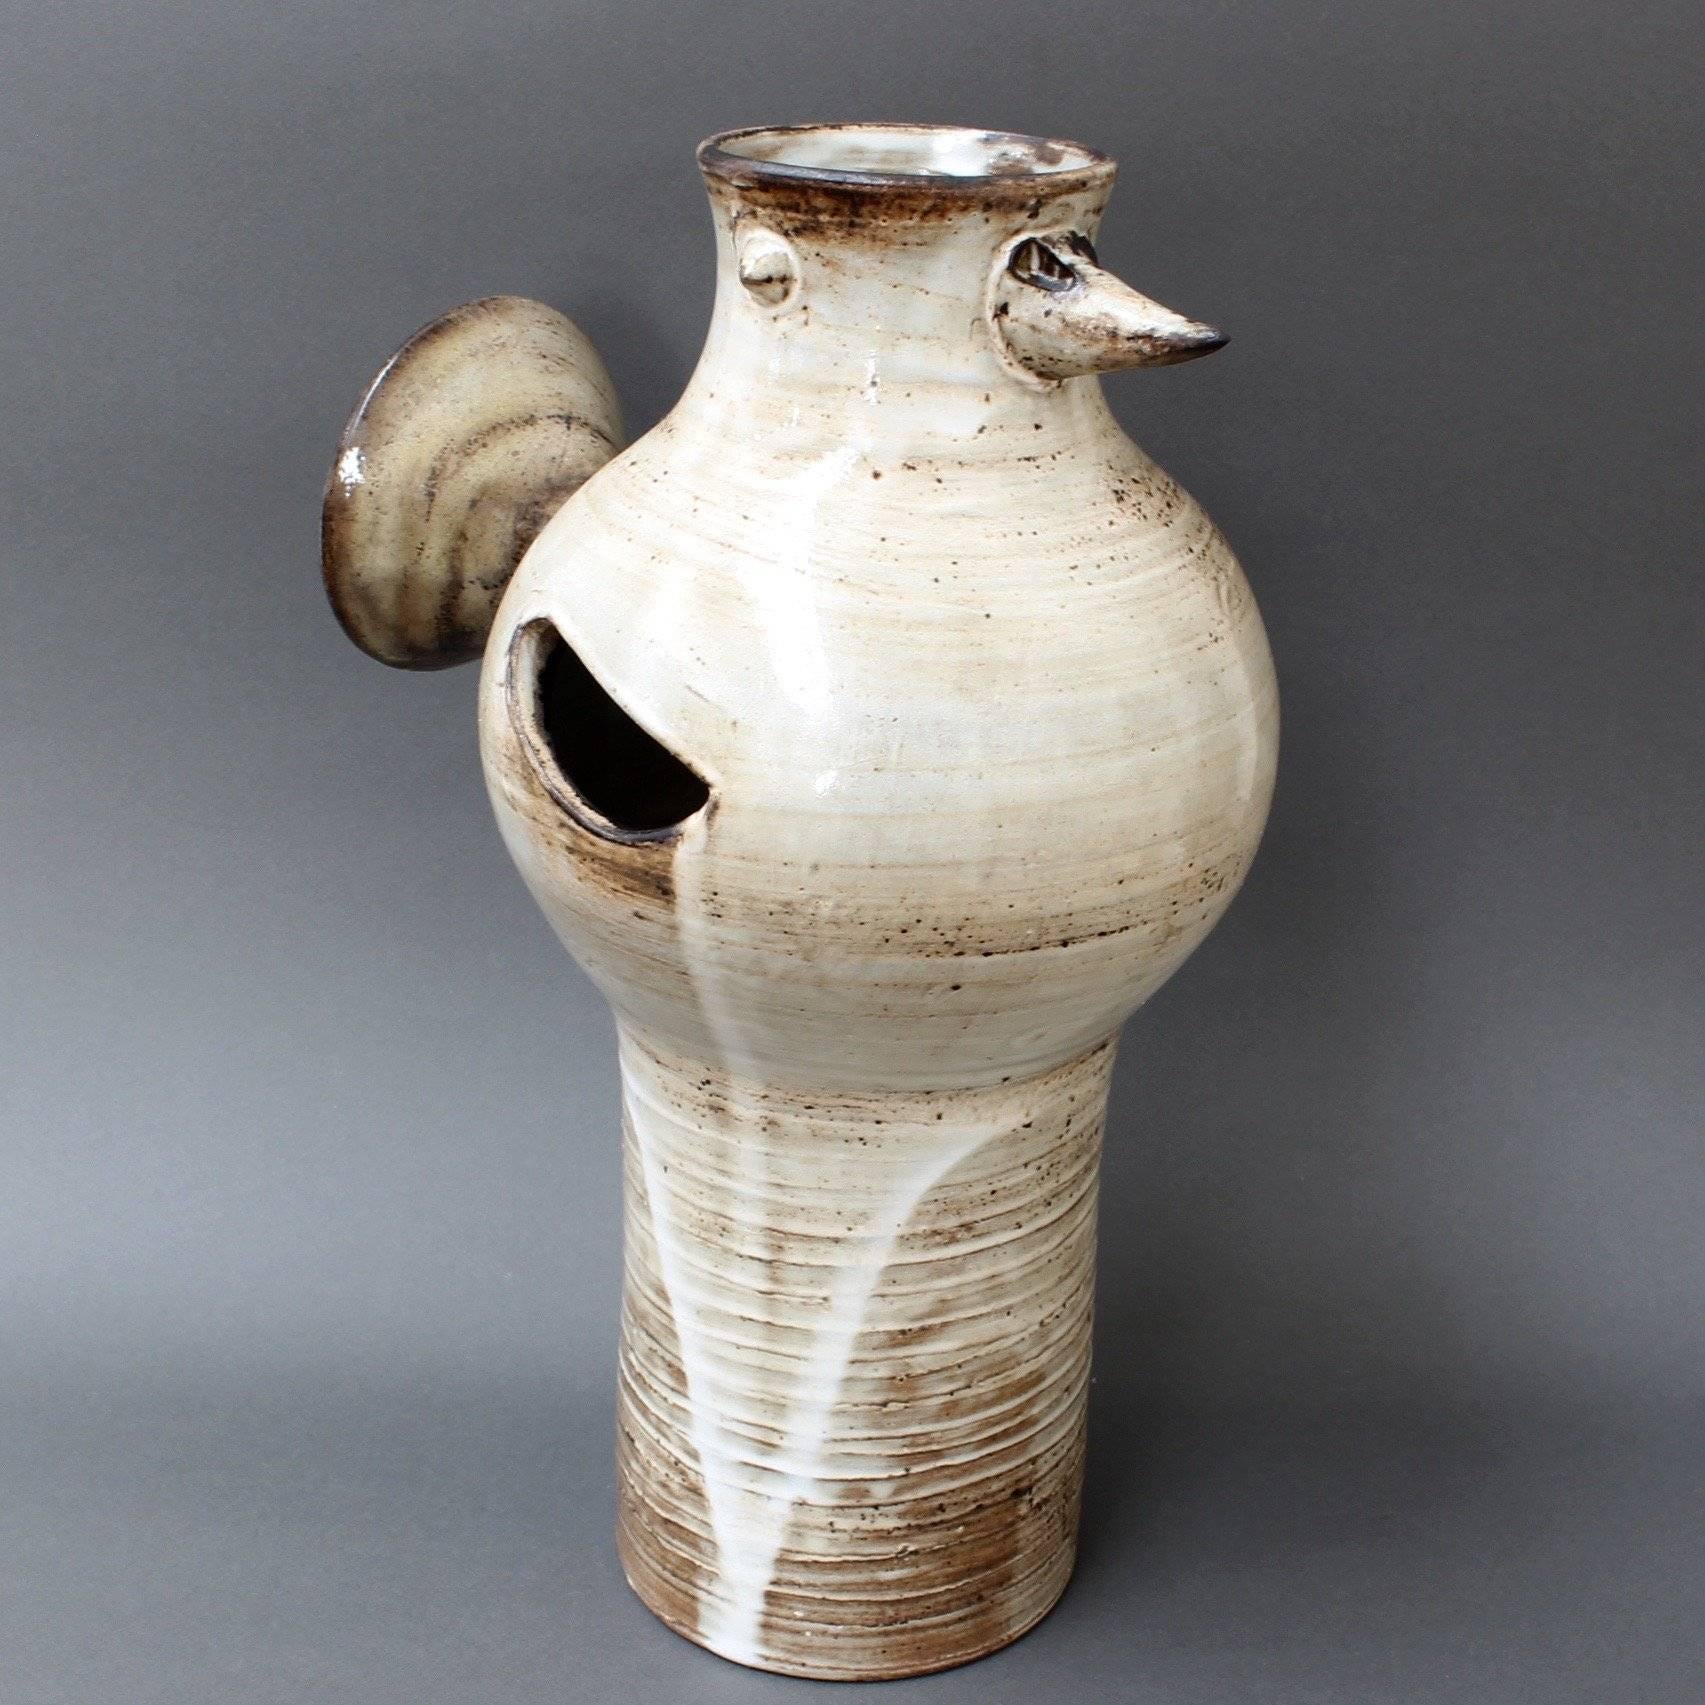 Glazed ceramic, stylised bird vase, circa 1960s by Jacques Pouchain (1925-2005). This is a tall, sculpted, ceramic vase in Pouchain's inimitable style. The rounded base is decorated with circular, ascending lines and a drip glaze which emanates from